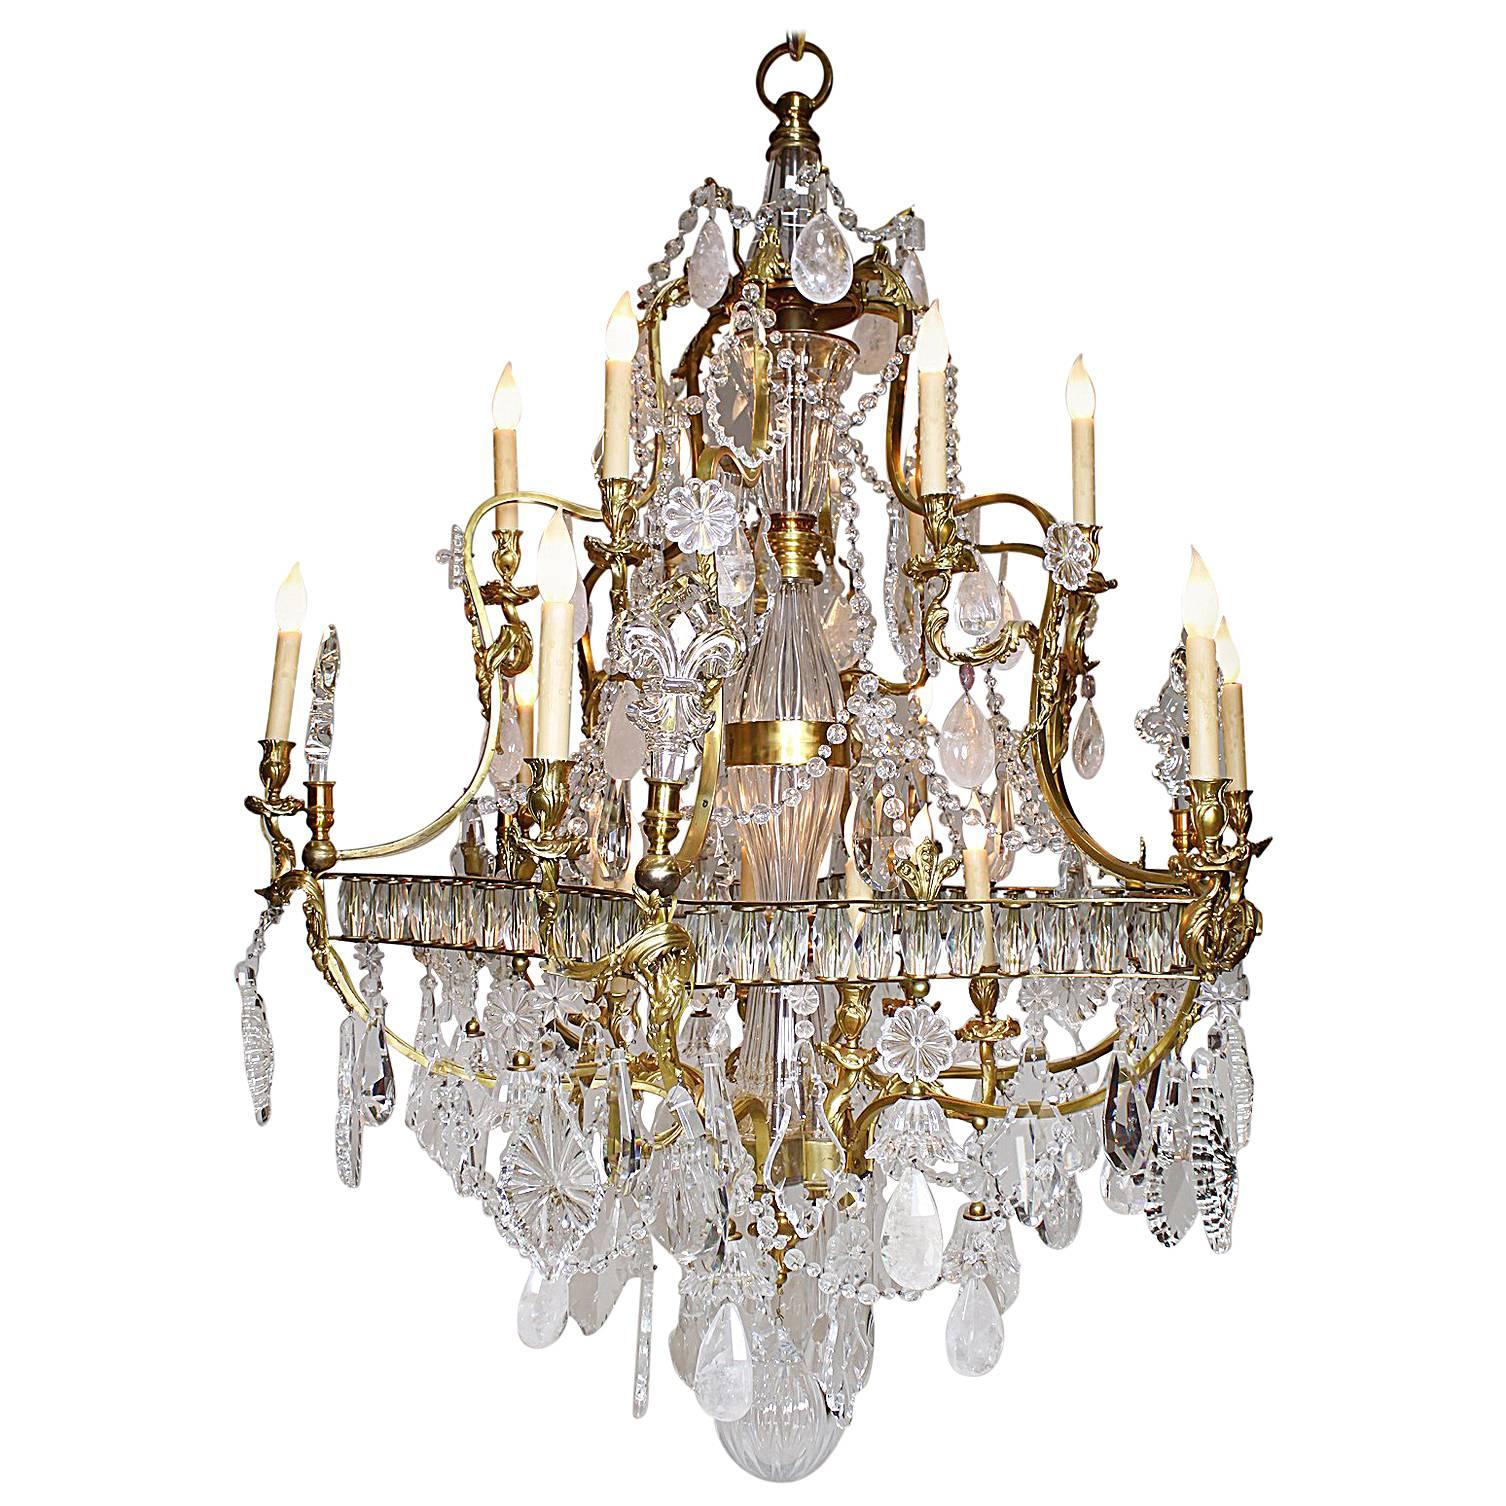 Fine French Louis XV Style Gilt-Bronze and Rock Crystal Chandelier, 20th Century For Sale